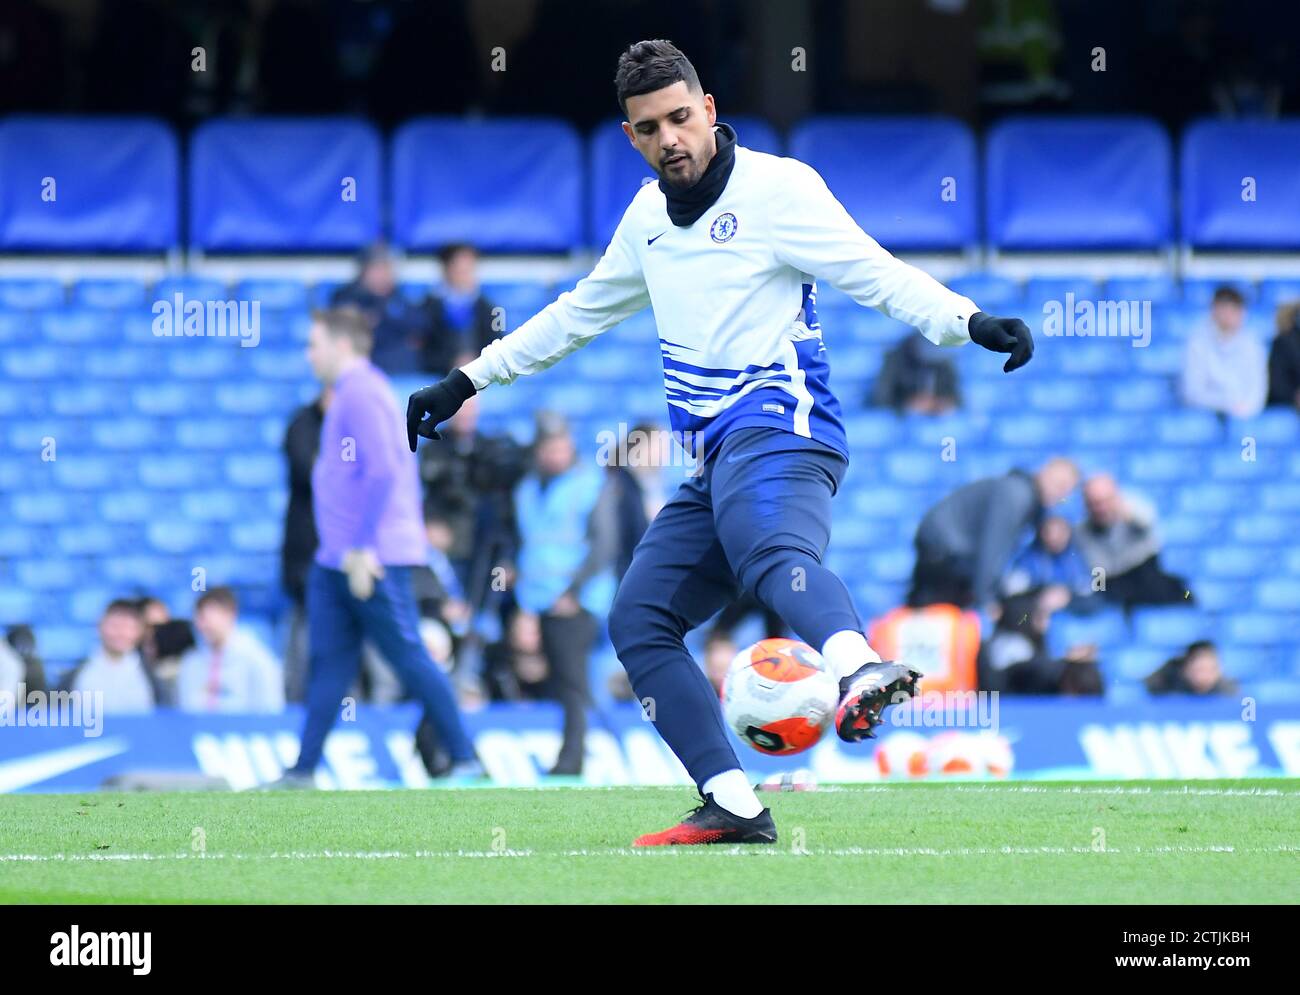 LONDON, ENGLAND - FEBRUARY 22, 2020: Emerson Palmieri dos Santos of Chelsea pictured during the 2019/20 Premier League game between Chelsea FC and Tottenham Hotspur FC at Stamford Bridge. Stock Photo